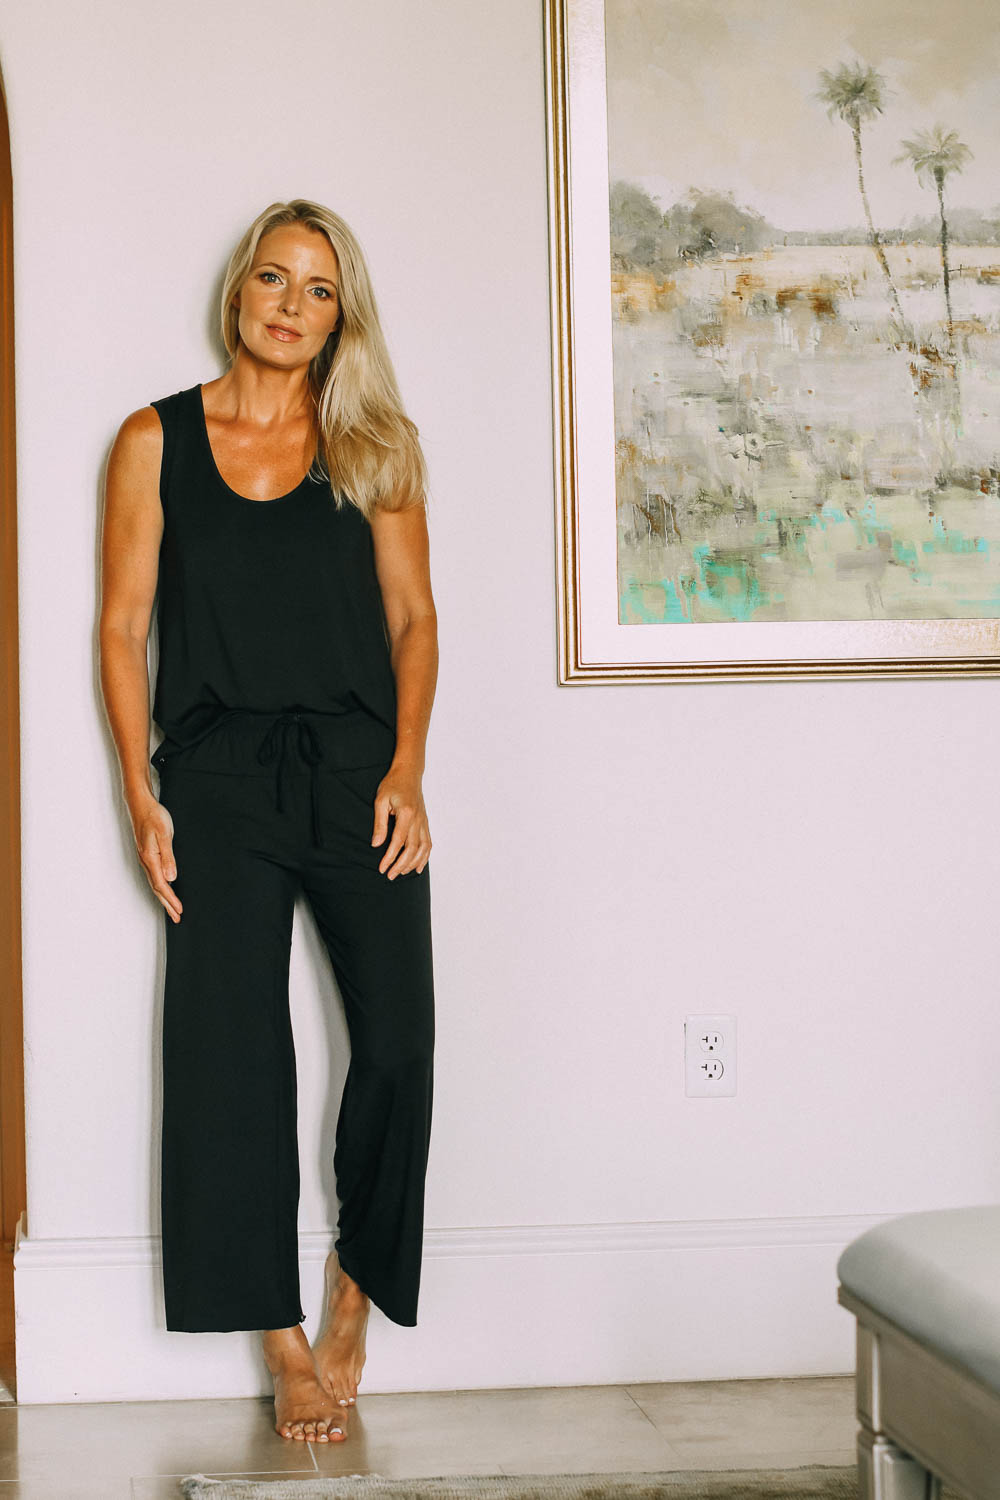 best pajamas, black luxe jersey sleeveless top and cropped pants pajamas set by Barefoot Dreams on blonde woman